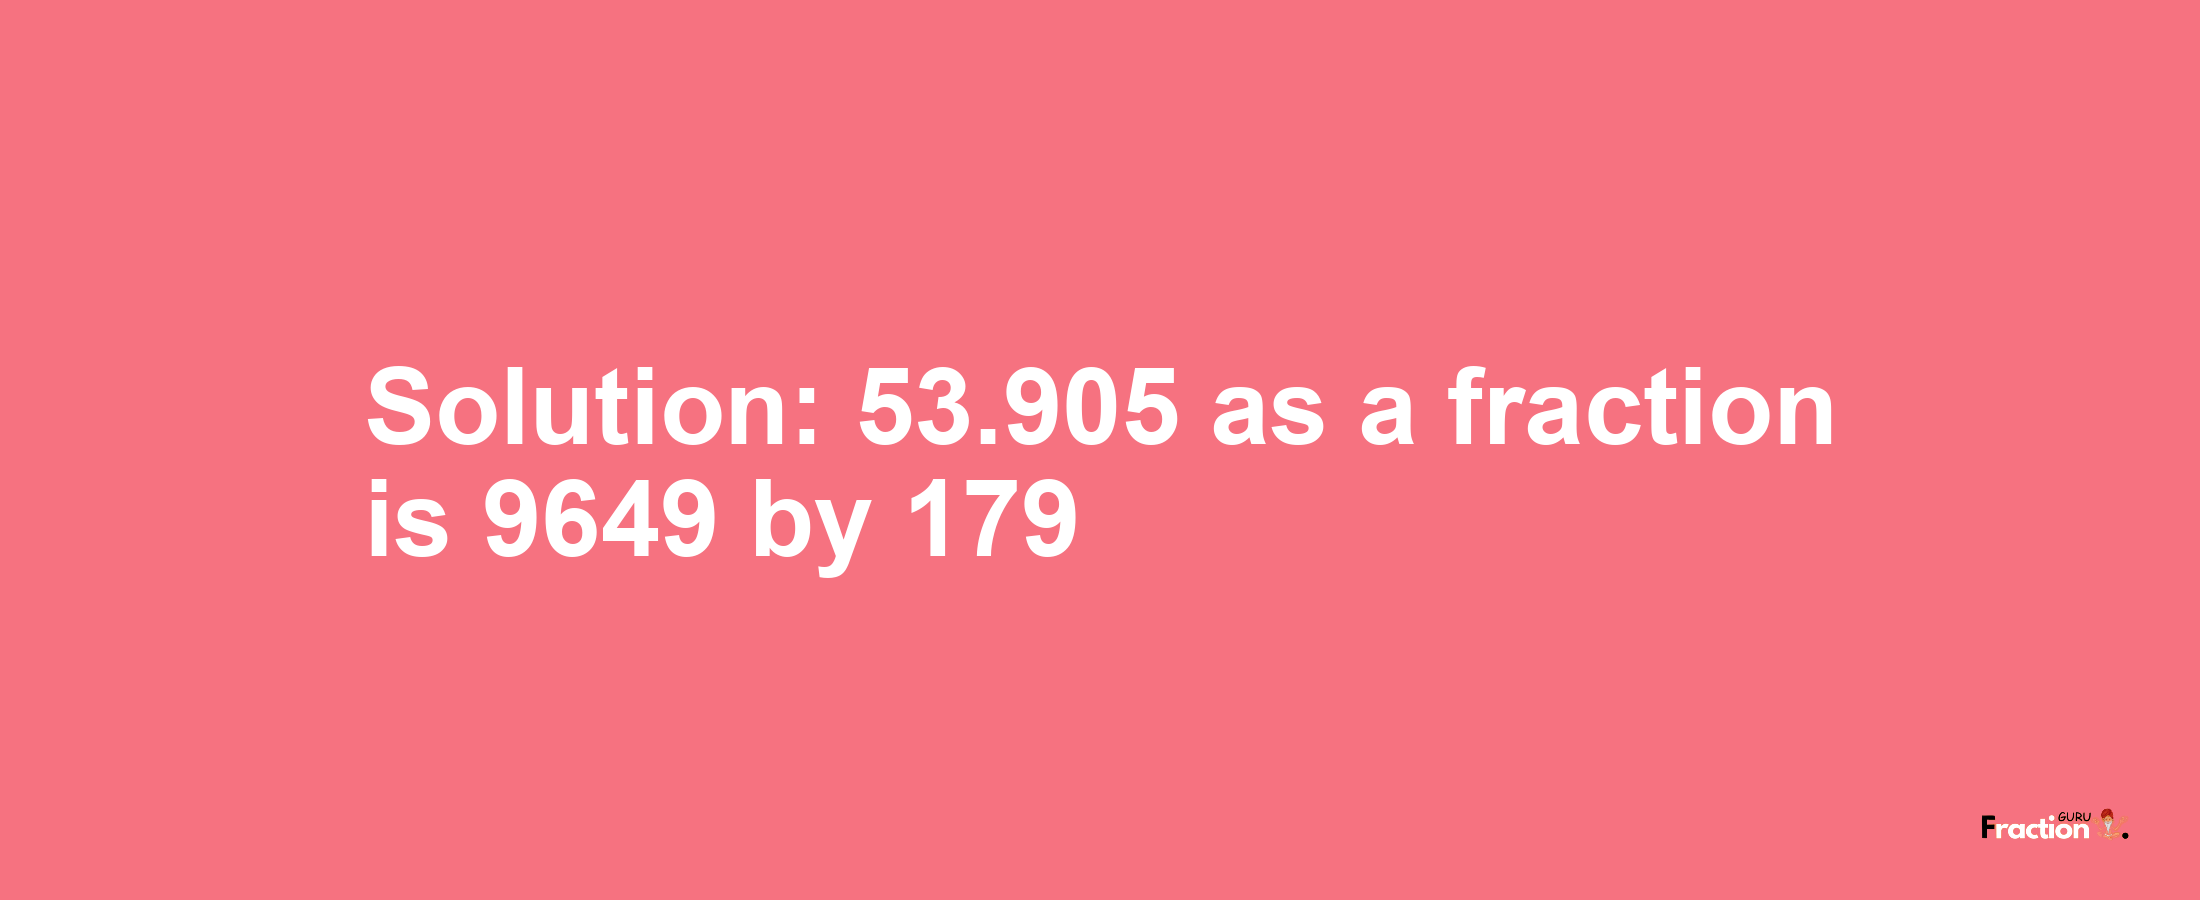 Solution:53.905 as a fraction is 9649/179